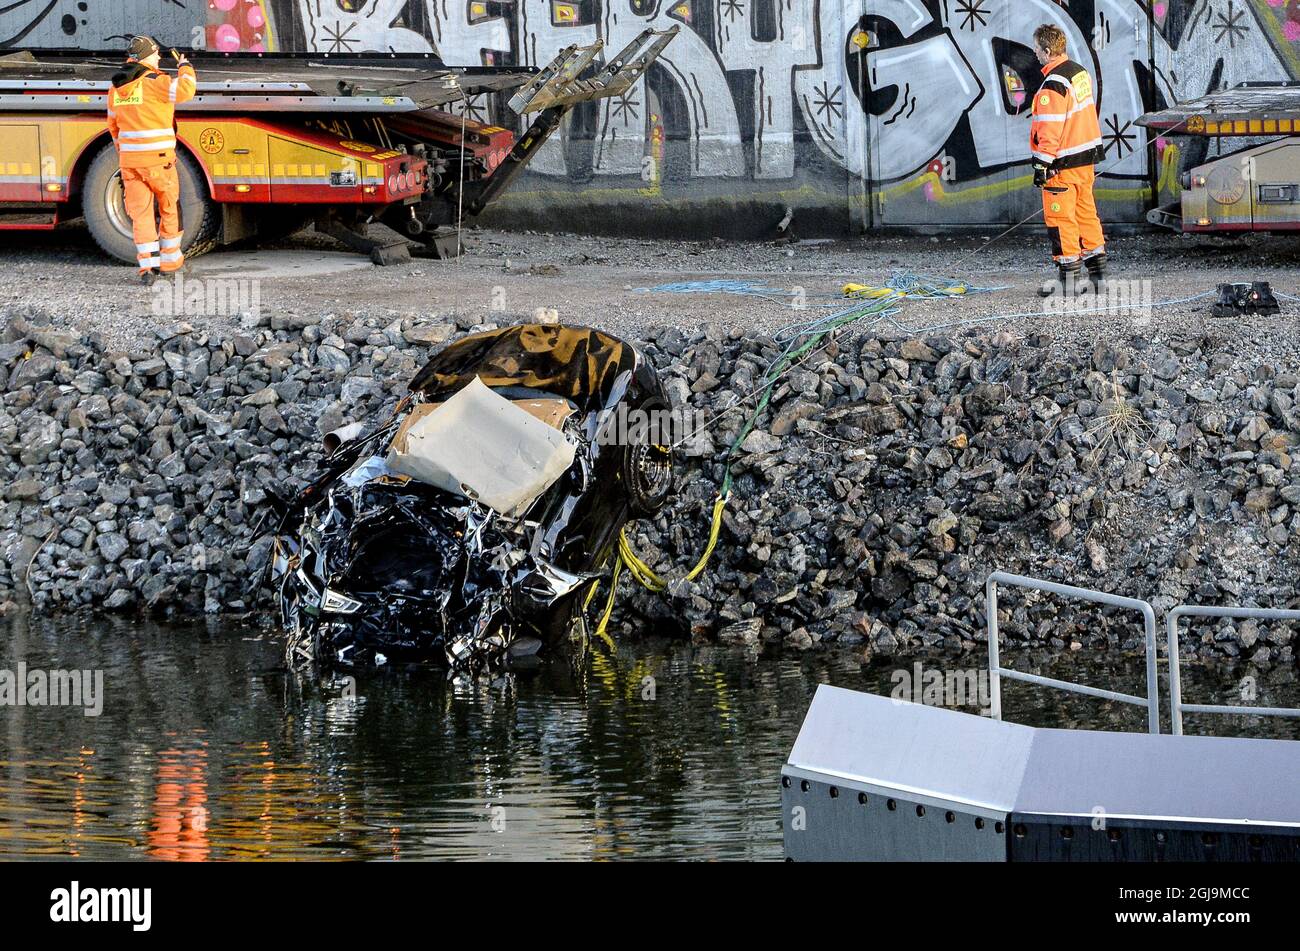 SODERTALJE 2016-02-13 A badly damaged car is towed up from the canal under the E4 highway bridge in Sodertalje, Sweden, February 13, 2016. Three people were killed when their car ran through the gate and flew off the 29 meters high open highway bridge early Saturday morning. The bridge had been opened to let a cargo ship pass under it and other cars had stopped in front of the gate and and red lights. It is under investigation why the crashed car failed to stop. Photo: Johan Nilsson / TT / ** SWEDEN OUT ** Stock Photo